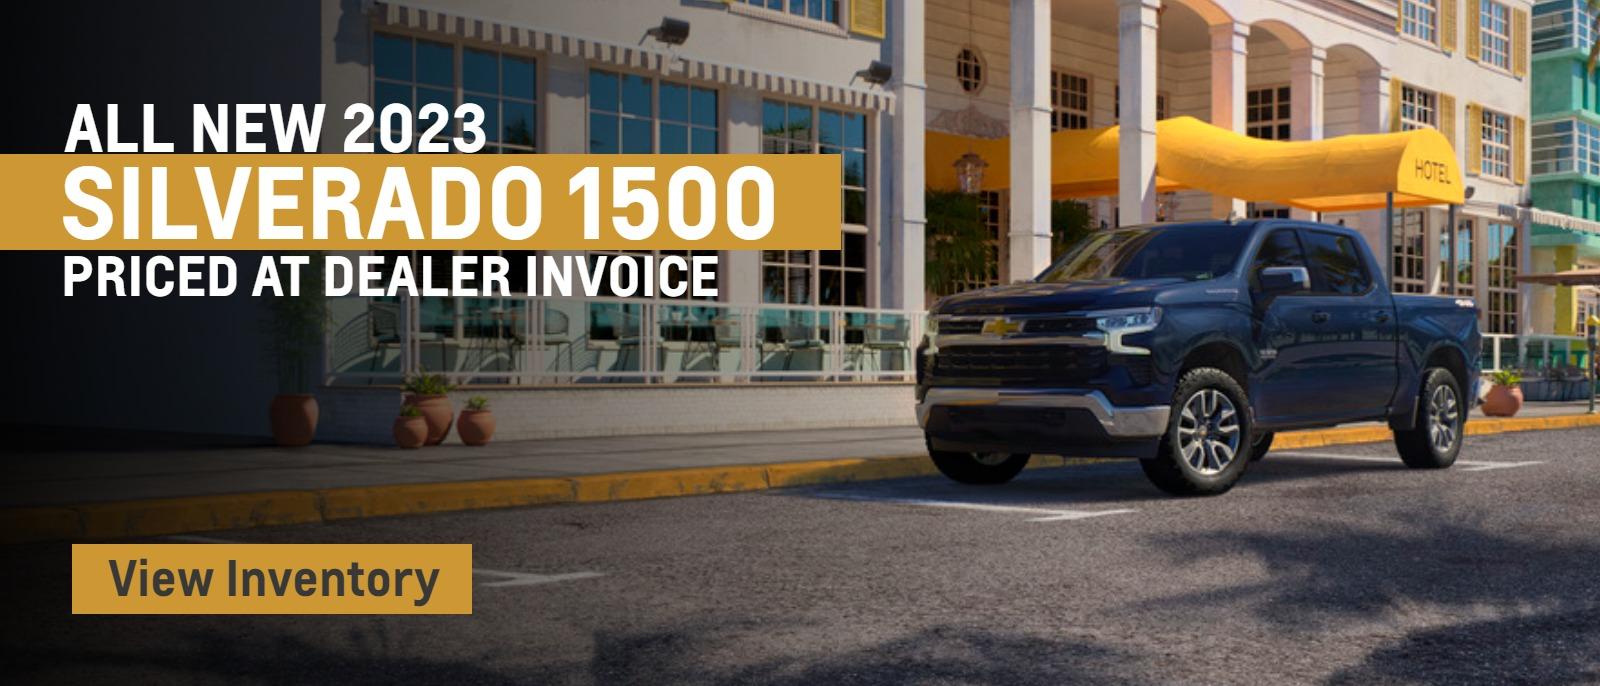 All New 2023 Silverado 1500 Priced At Dealer Invoice
please link to new 2023 inventory only